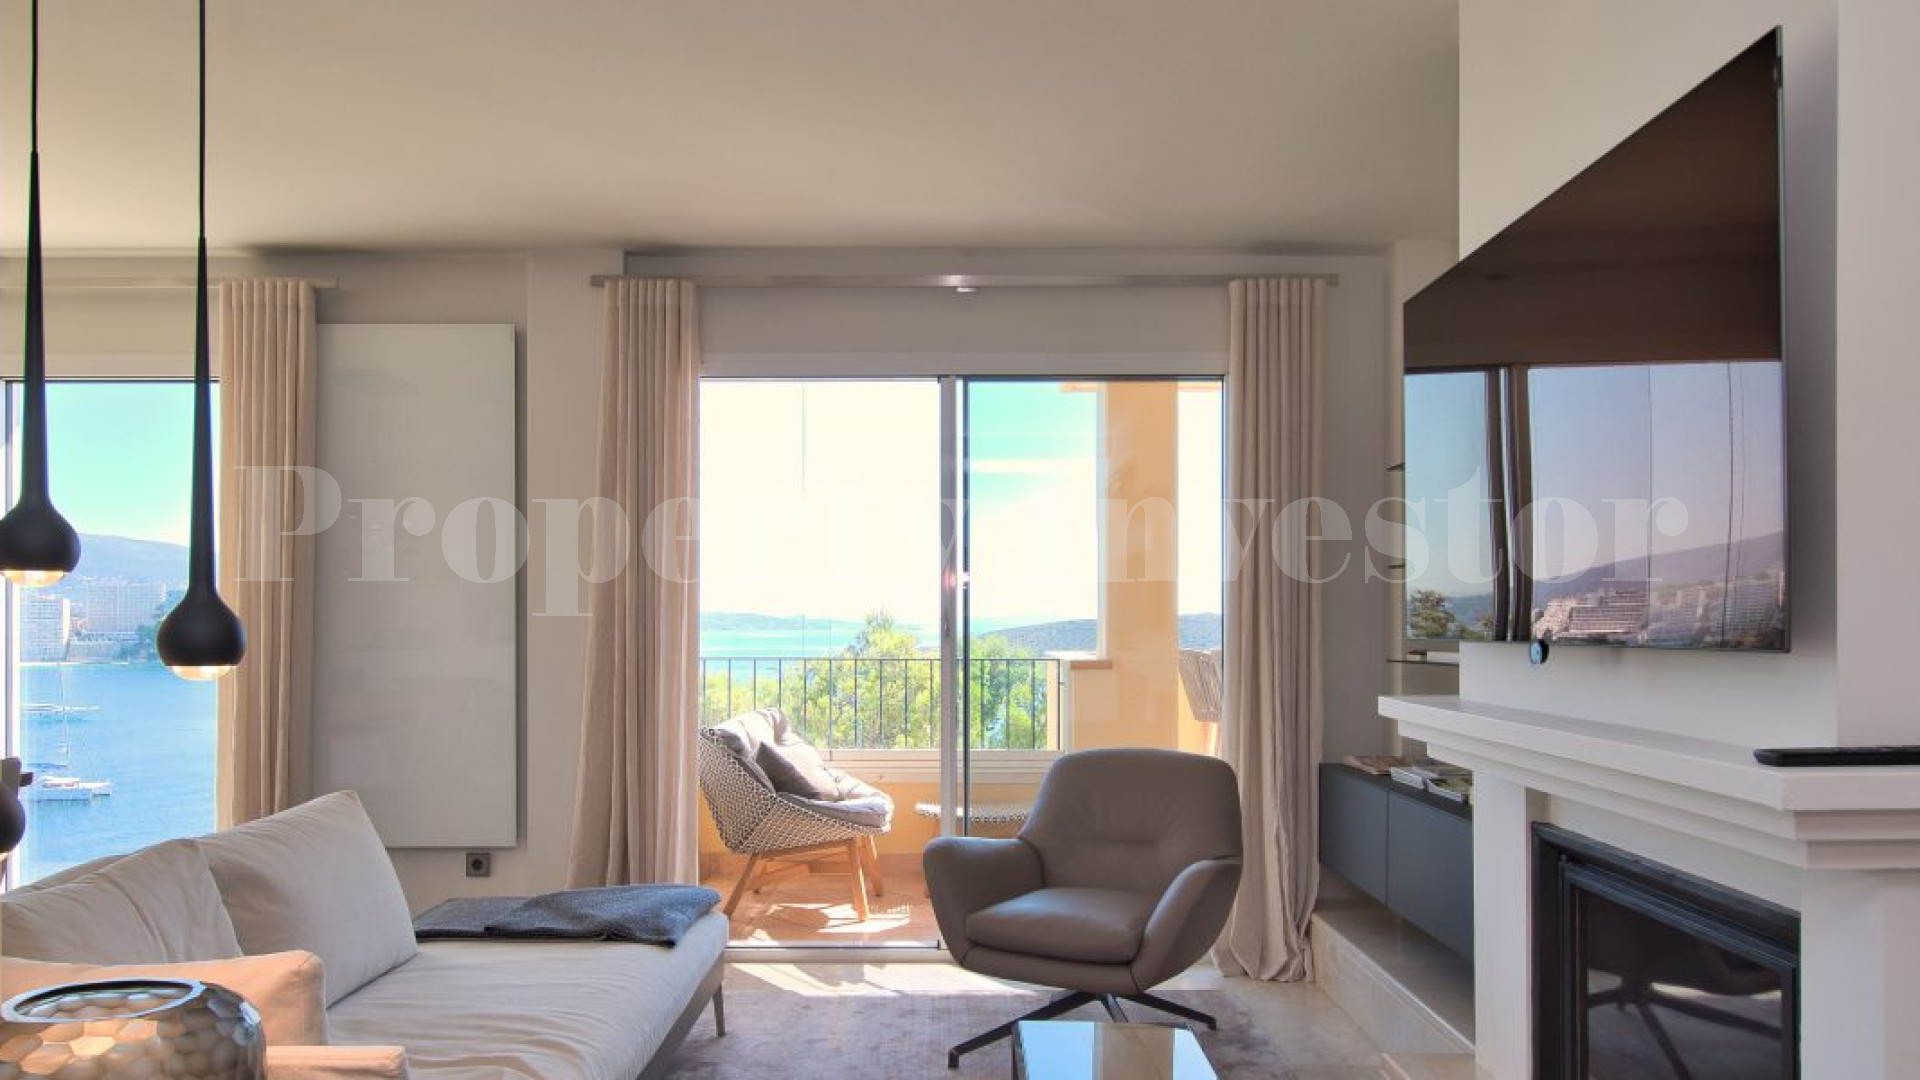 Luxury First Line 2 Bedroom Sea View Apartment in Cala Vinyes